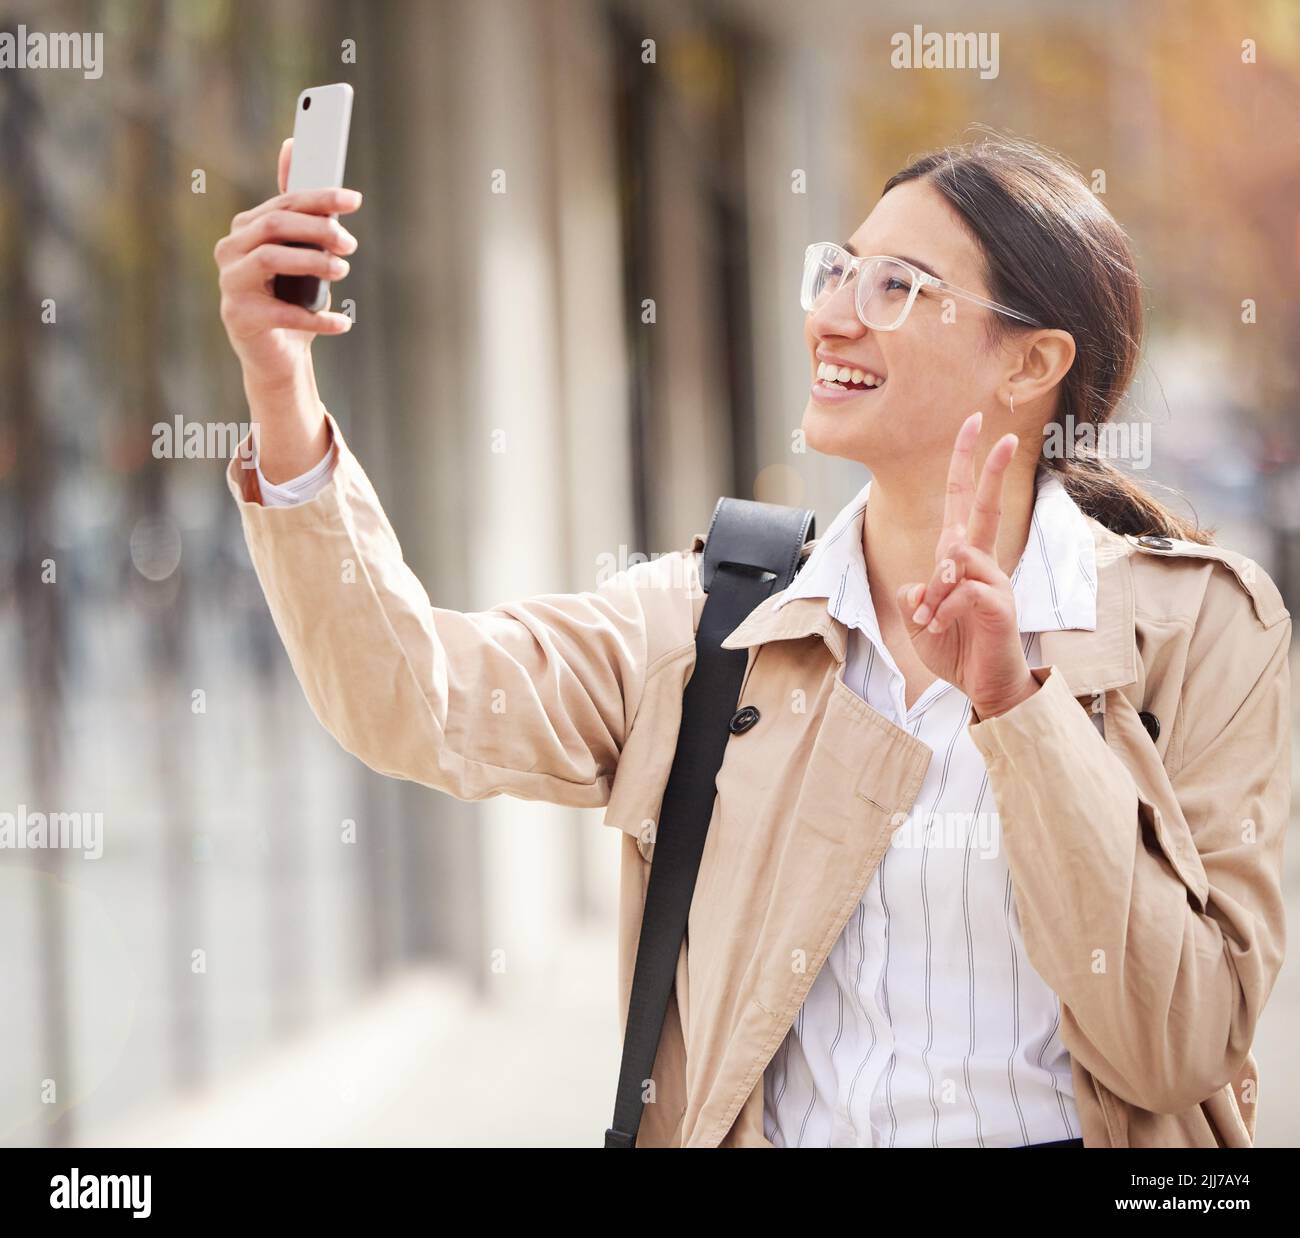 Enjoying every minute. a young woman using a smartphone and taking a selfie while out in the city. Stock Photo